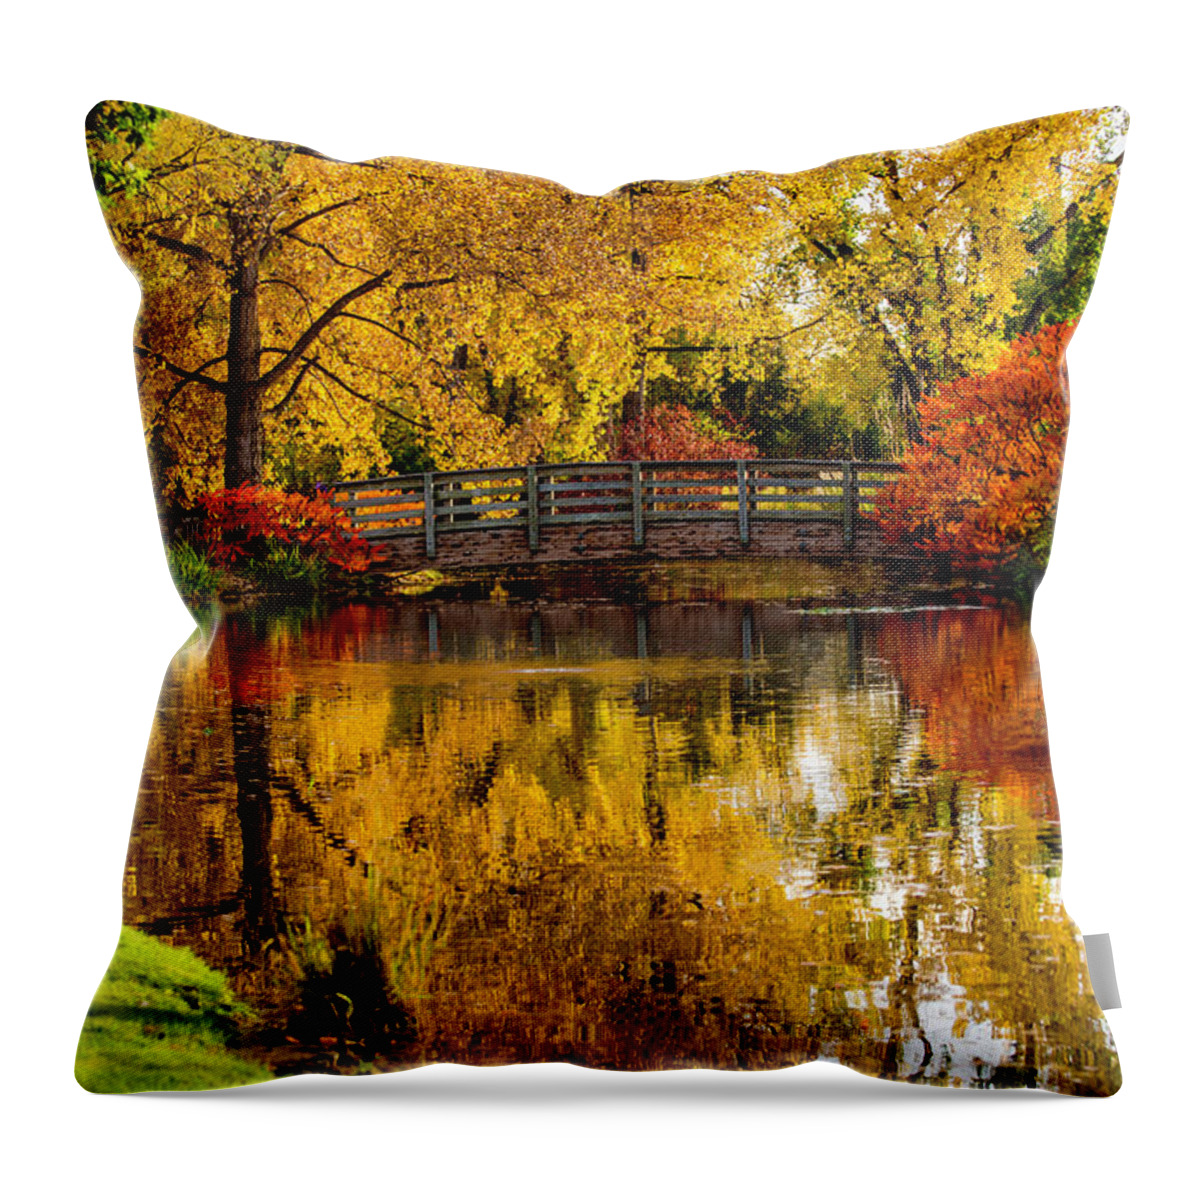 Colorado Throw Pillow featuring the photograph Colorful Reflections by Kristal Kraft